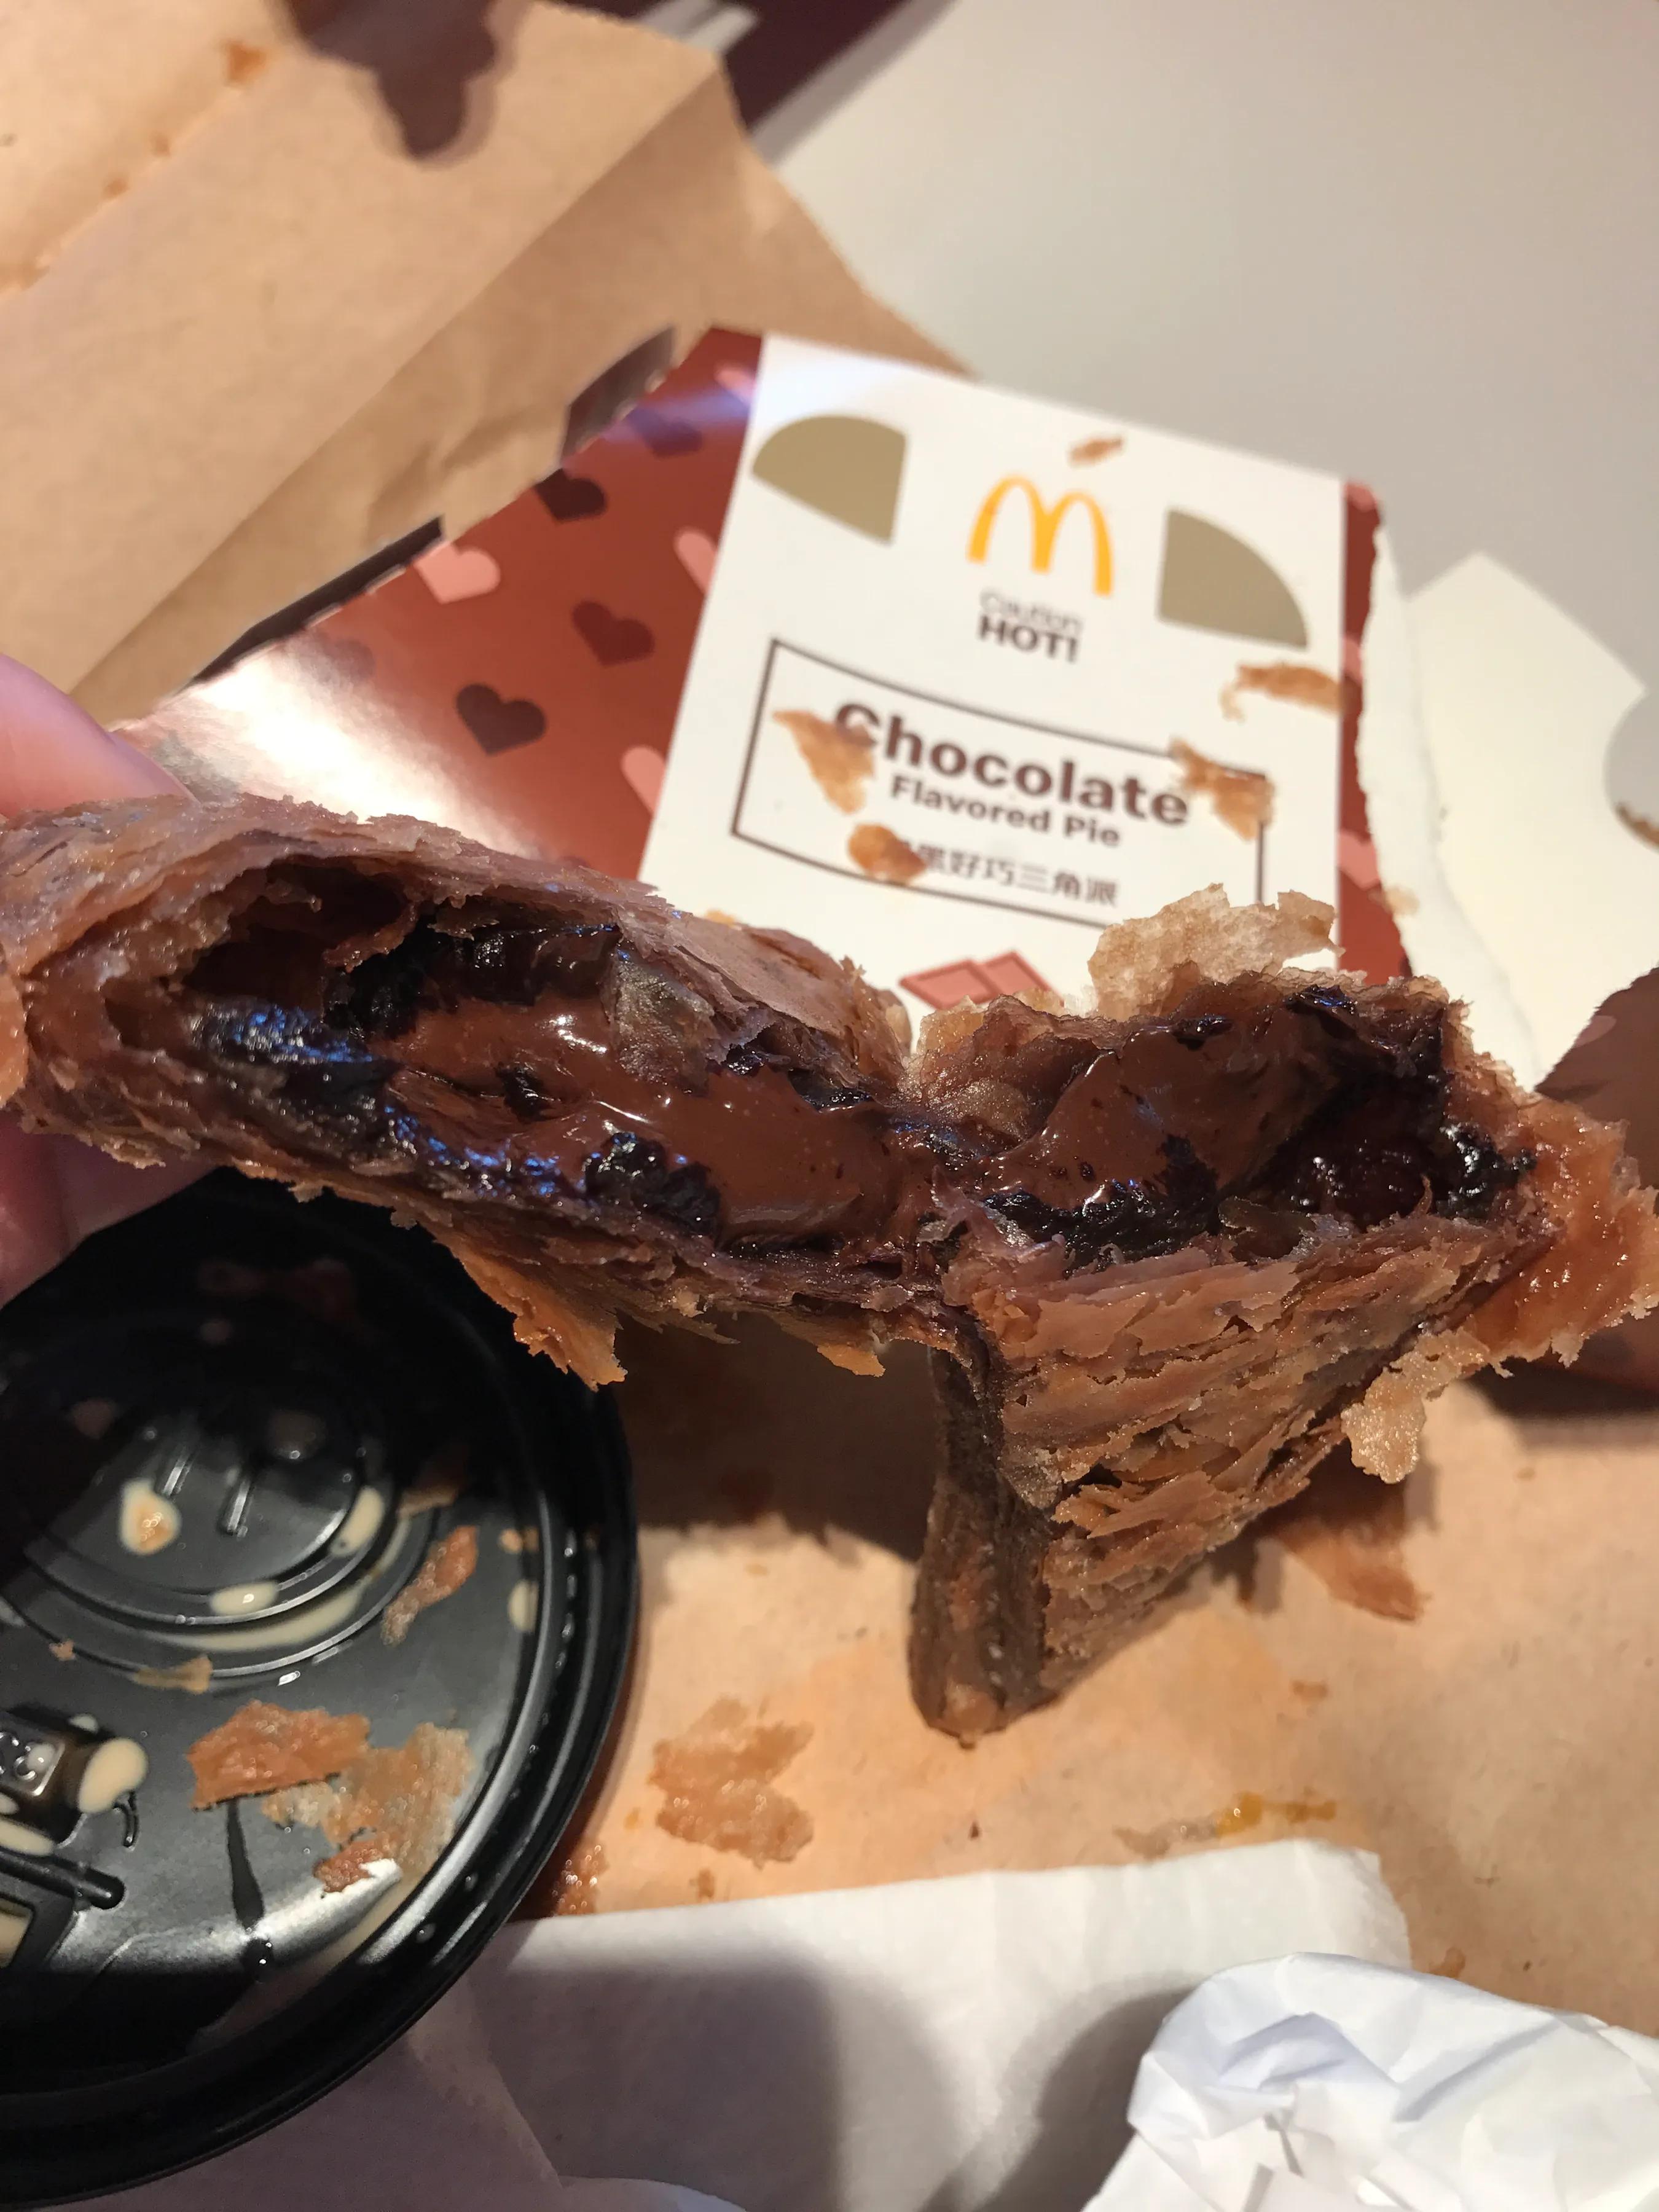 Mcdonald's of have a taste of what is just in season tastes hamburger of big a round mass of food and chocolate group newly